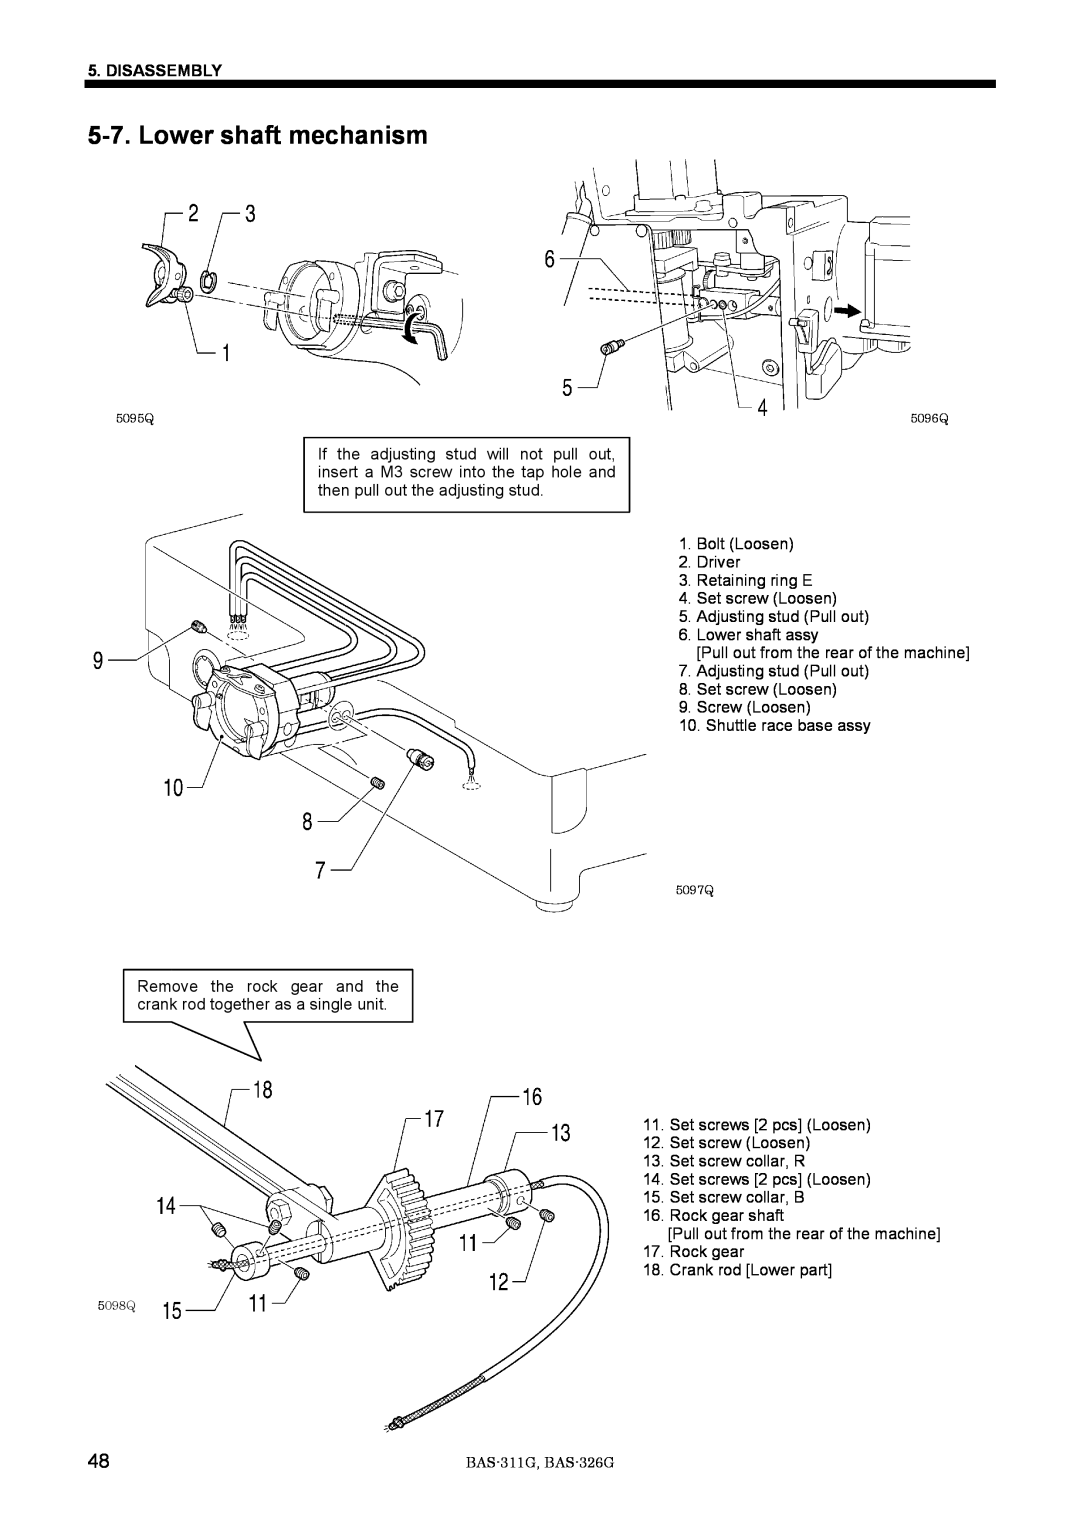 Brother BAS-311G service manual Lower shaft mechanism, Disassembly 